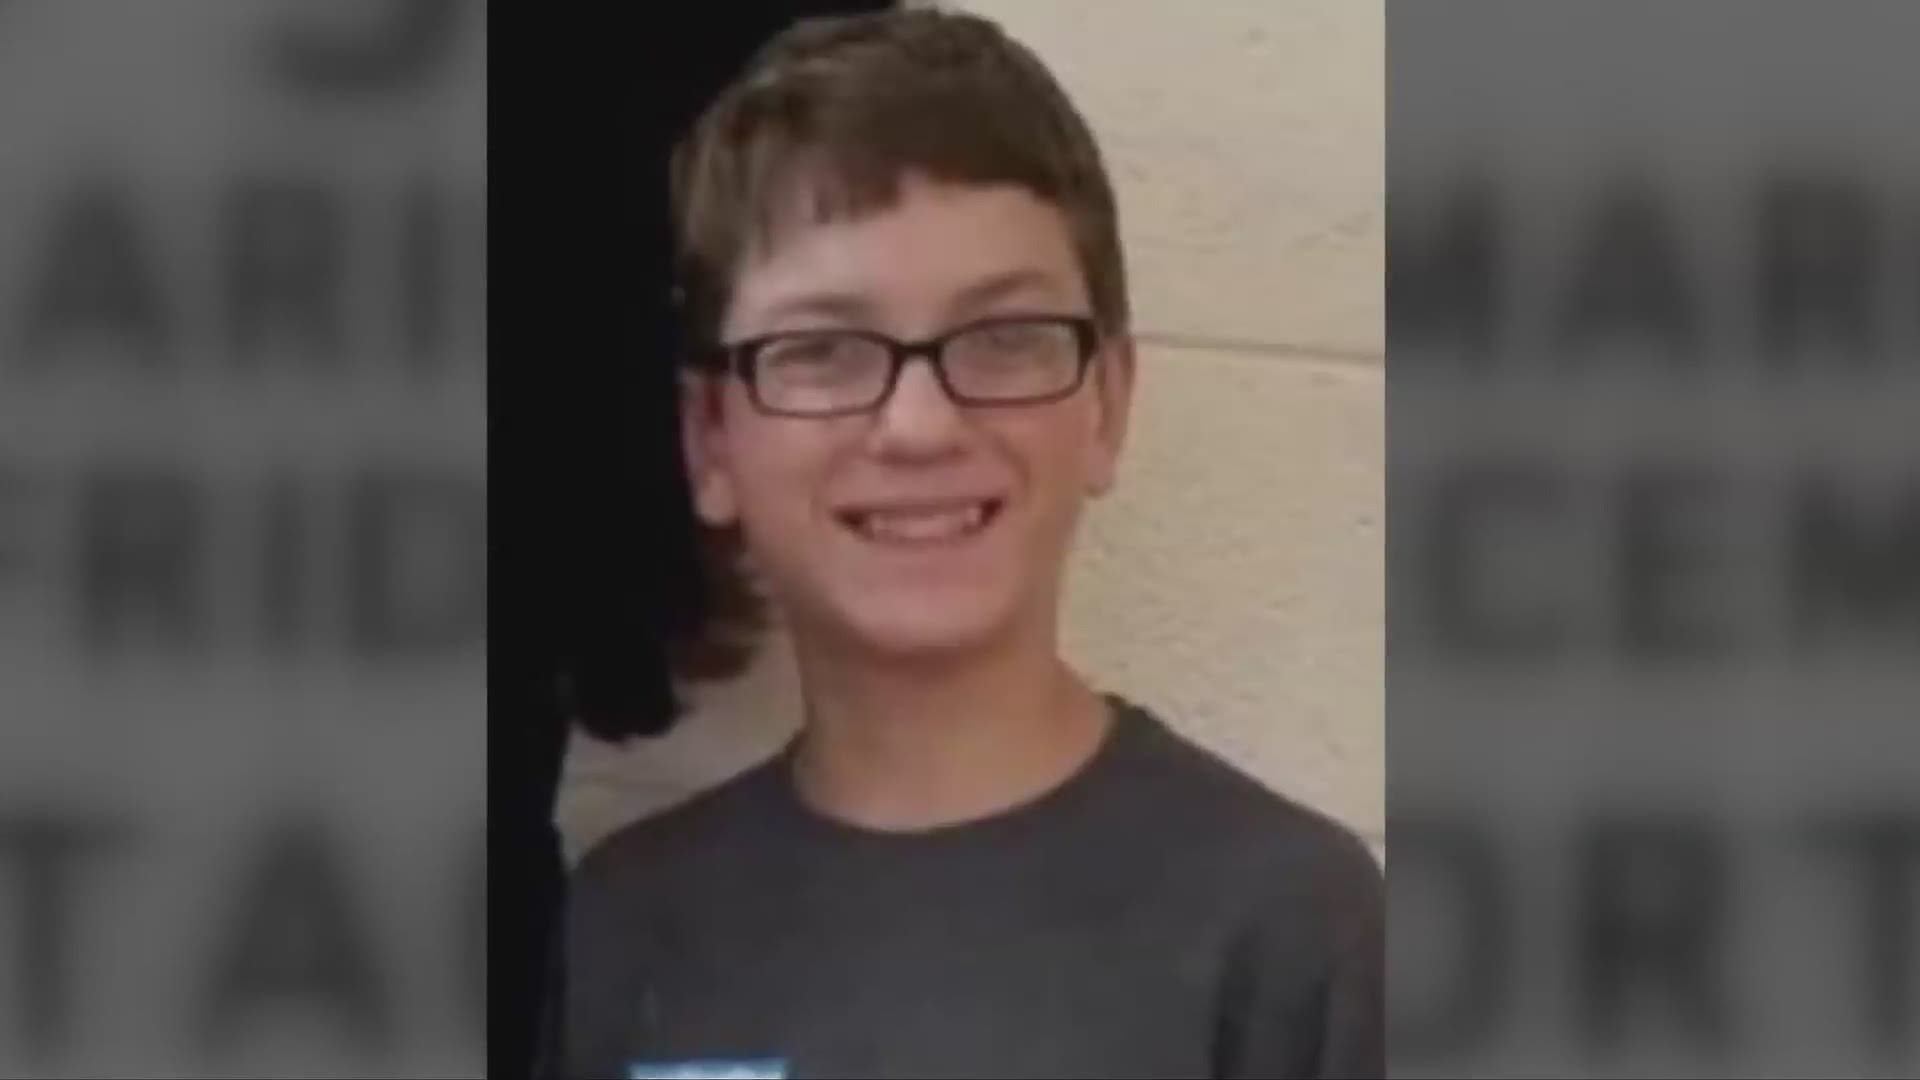 Jan. 14, 2020: Authorities say the body of 14-year-old Harley Dilly was recovered from a vacant home in Port Clinton. His death appears to be accidental.